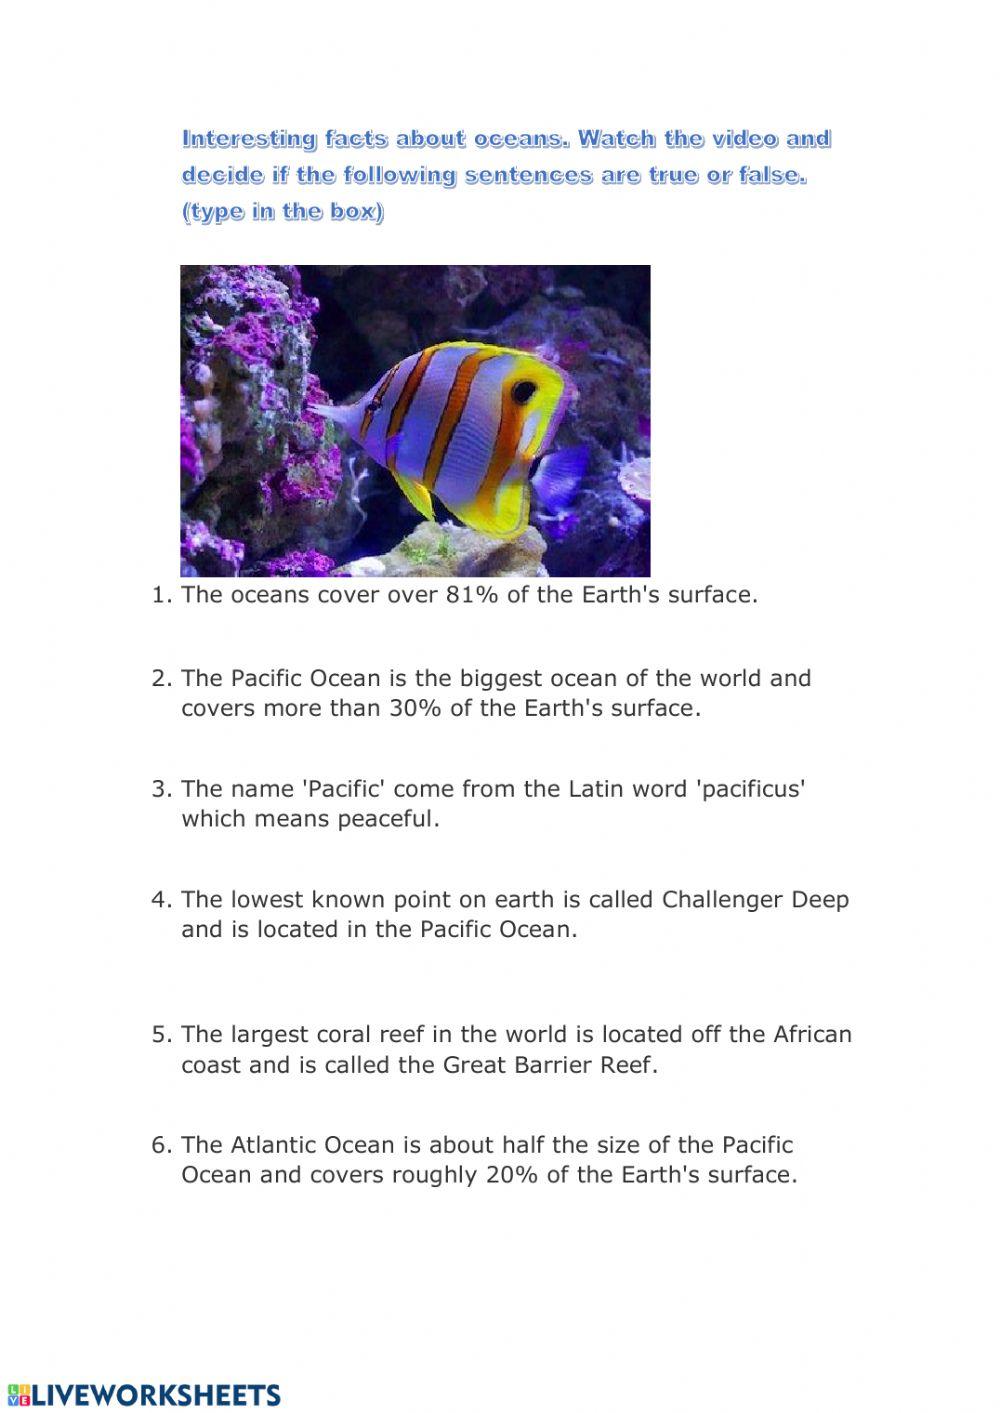 Interesting facts about oceans